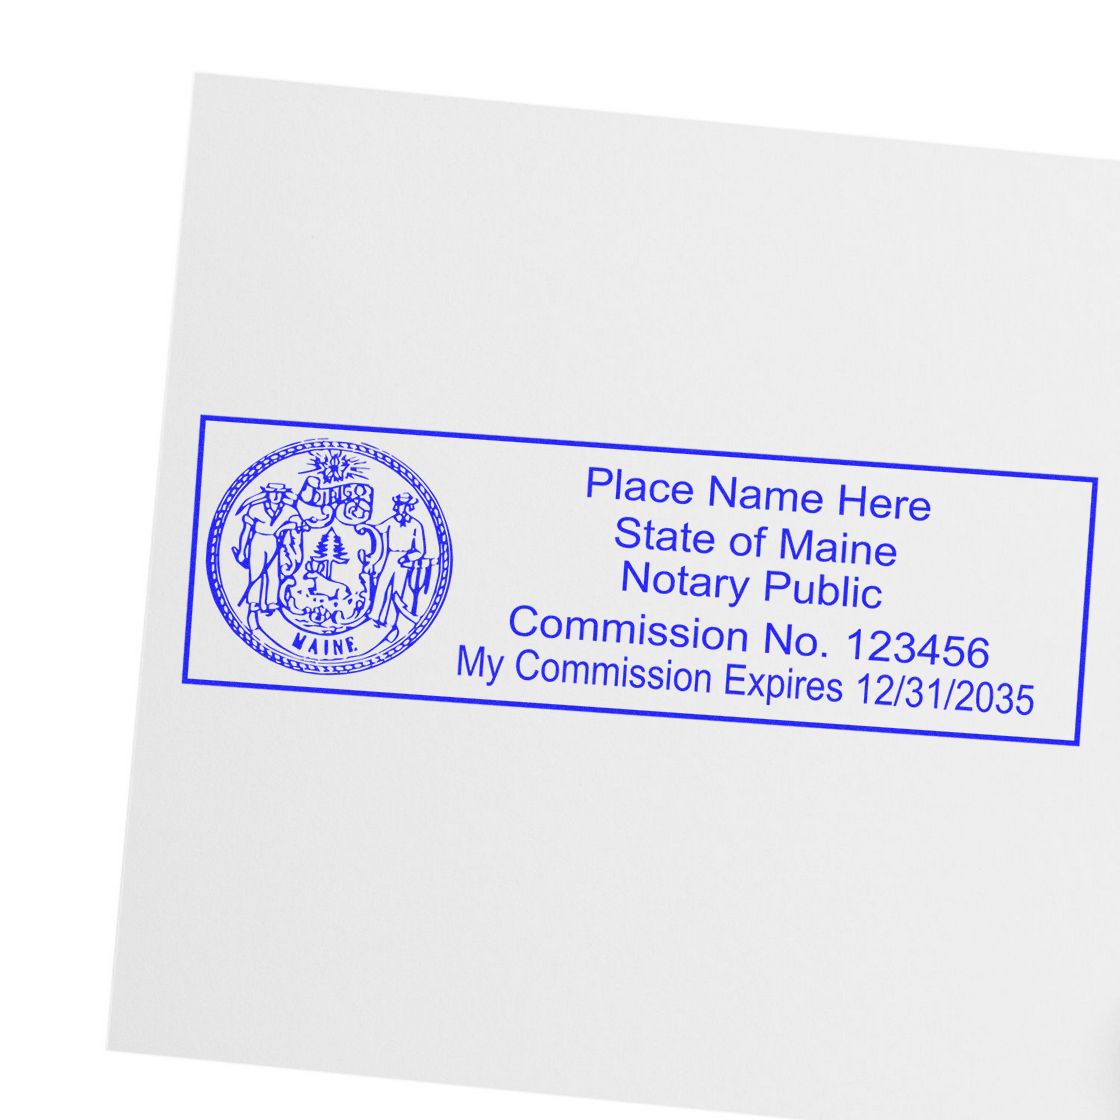 An alternative view of the Heavy-Duty Maine Rectangular Notary Stamp stamped on a sheet of paper showing the image in use